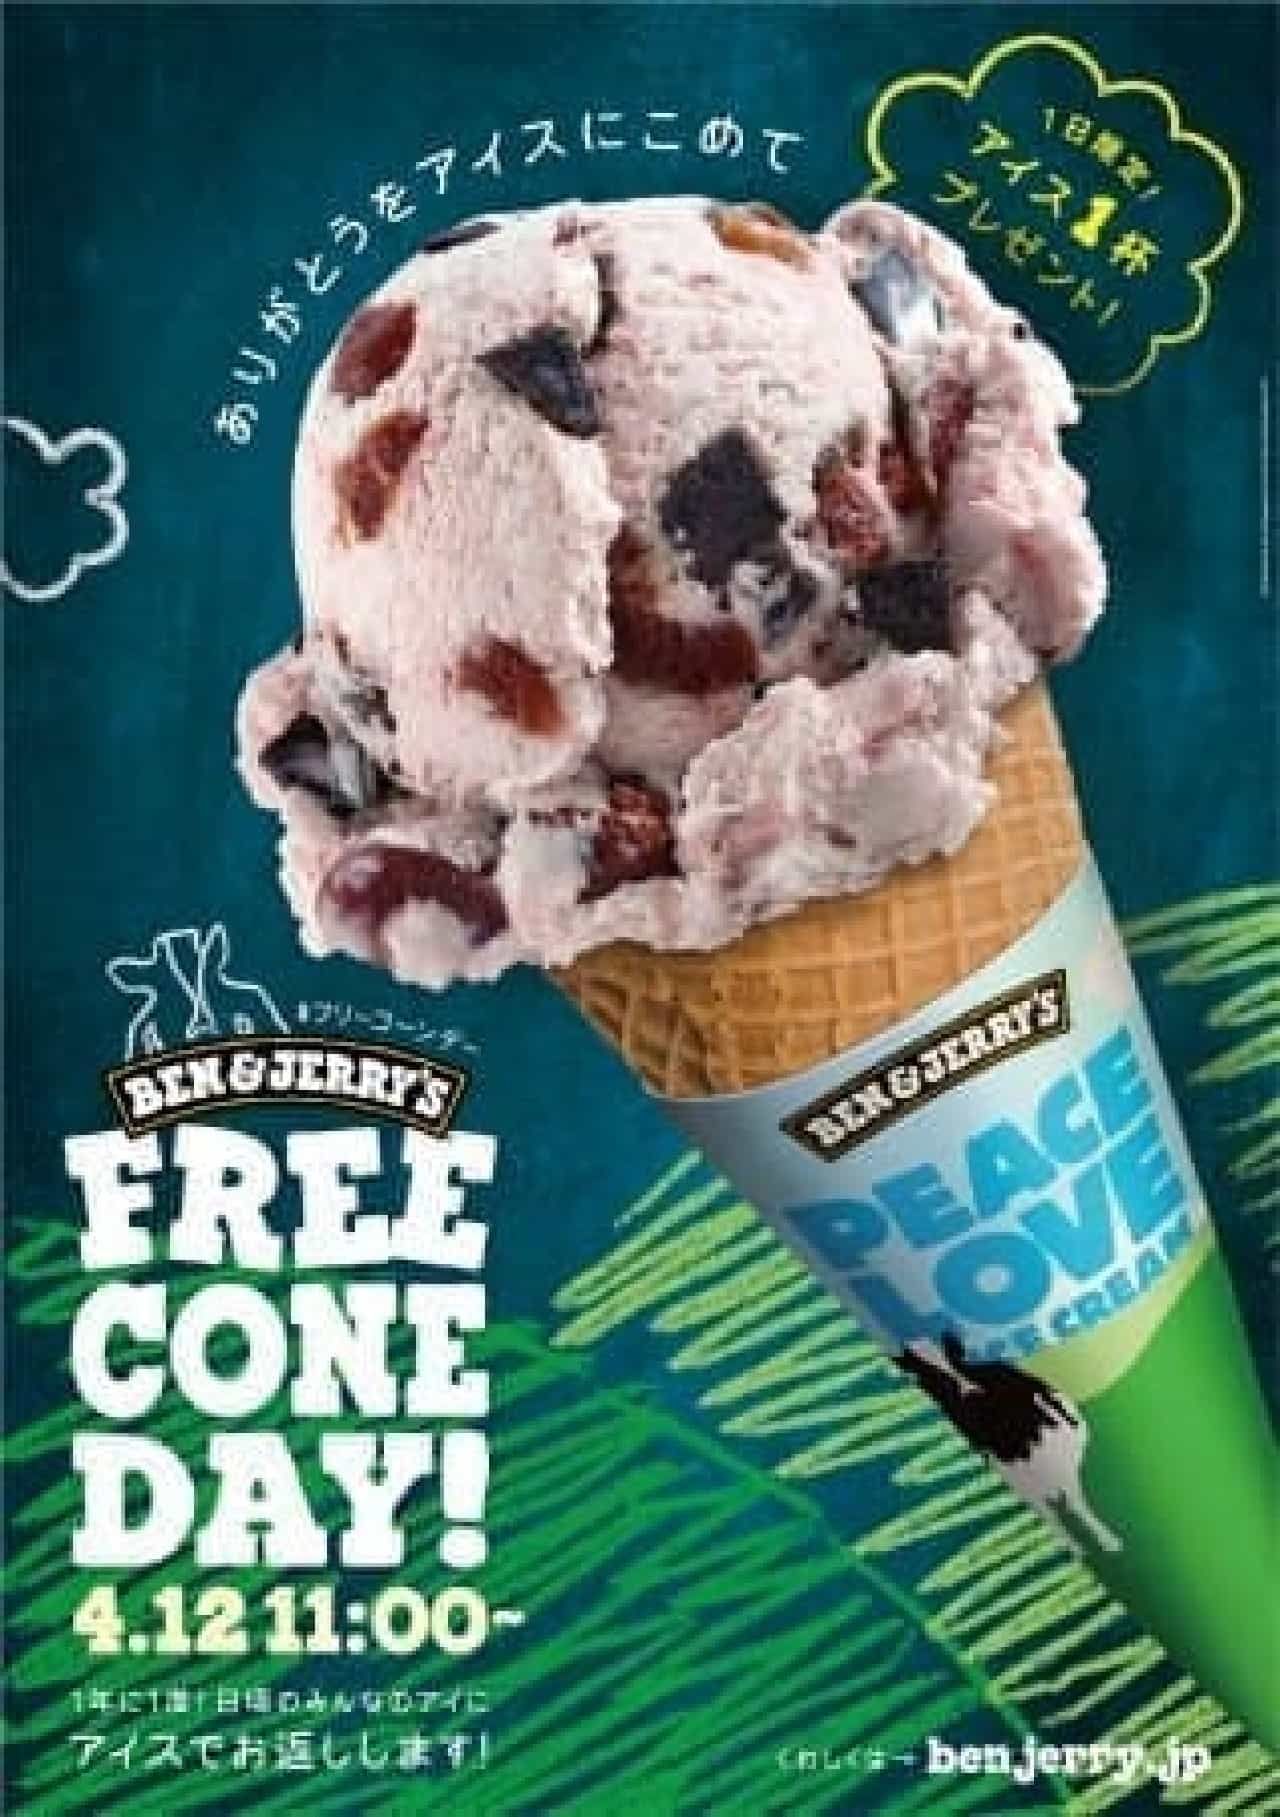 Ben & Jerry's "Free Corn Day" is back again this year!